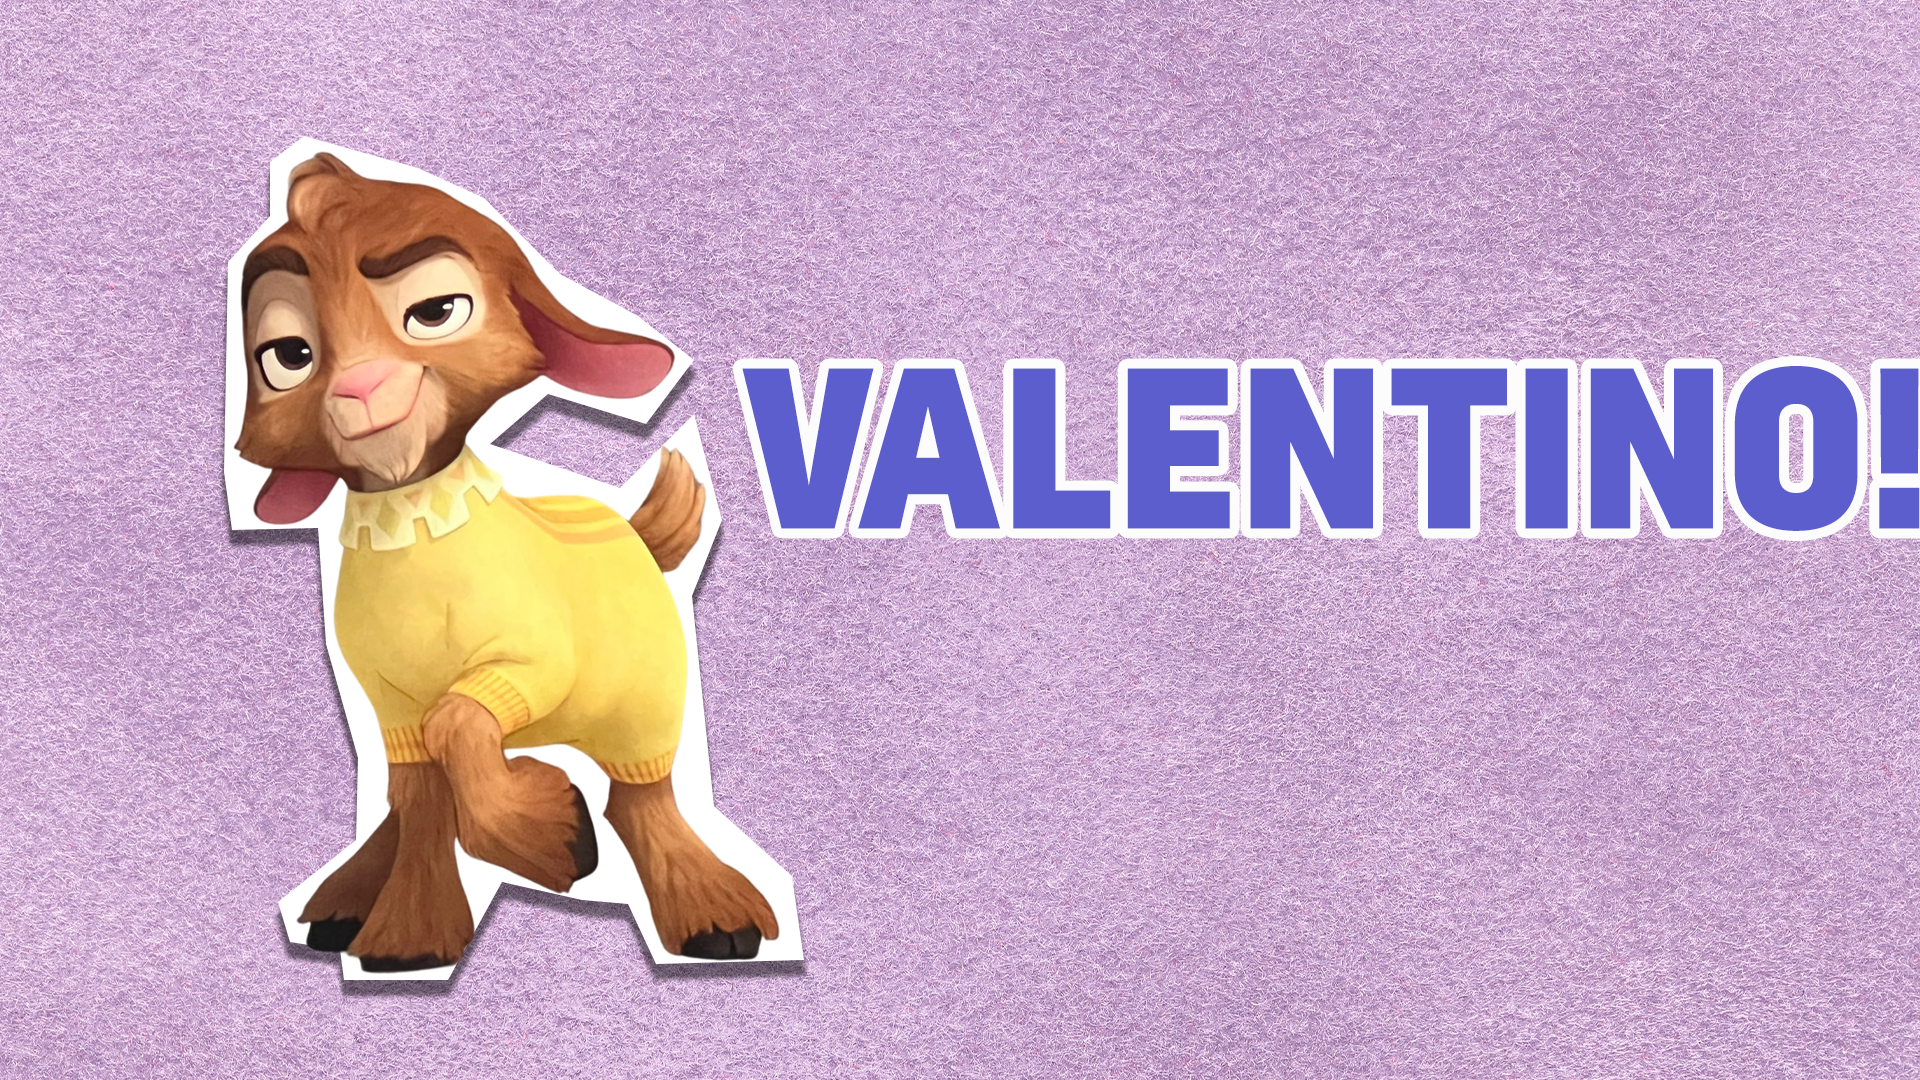 You're Valentino! You're fun, adventurous and always like making people laugh!